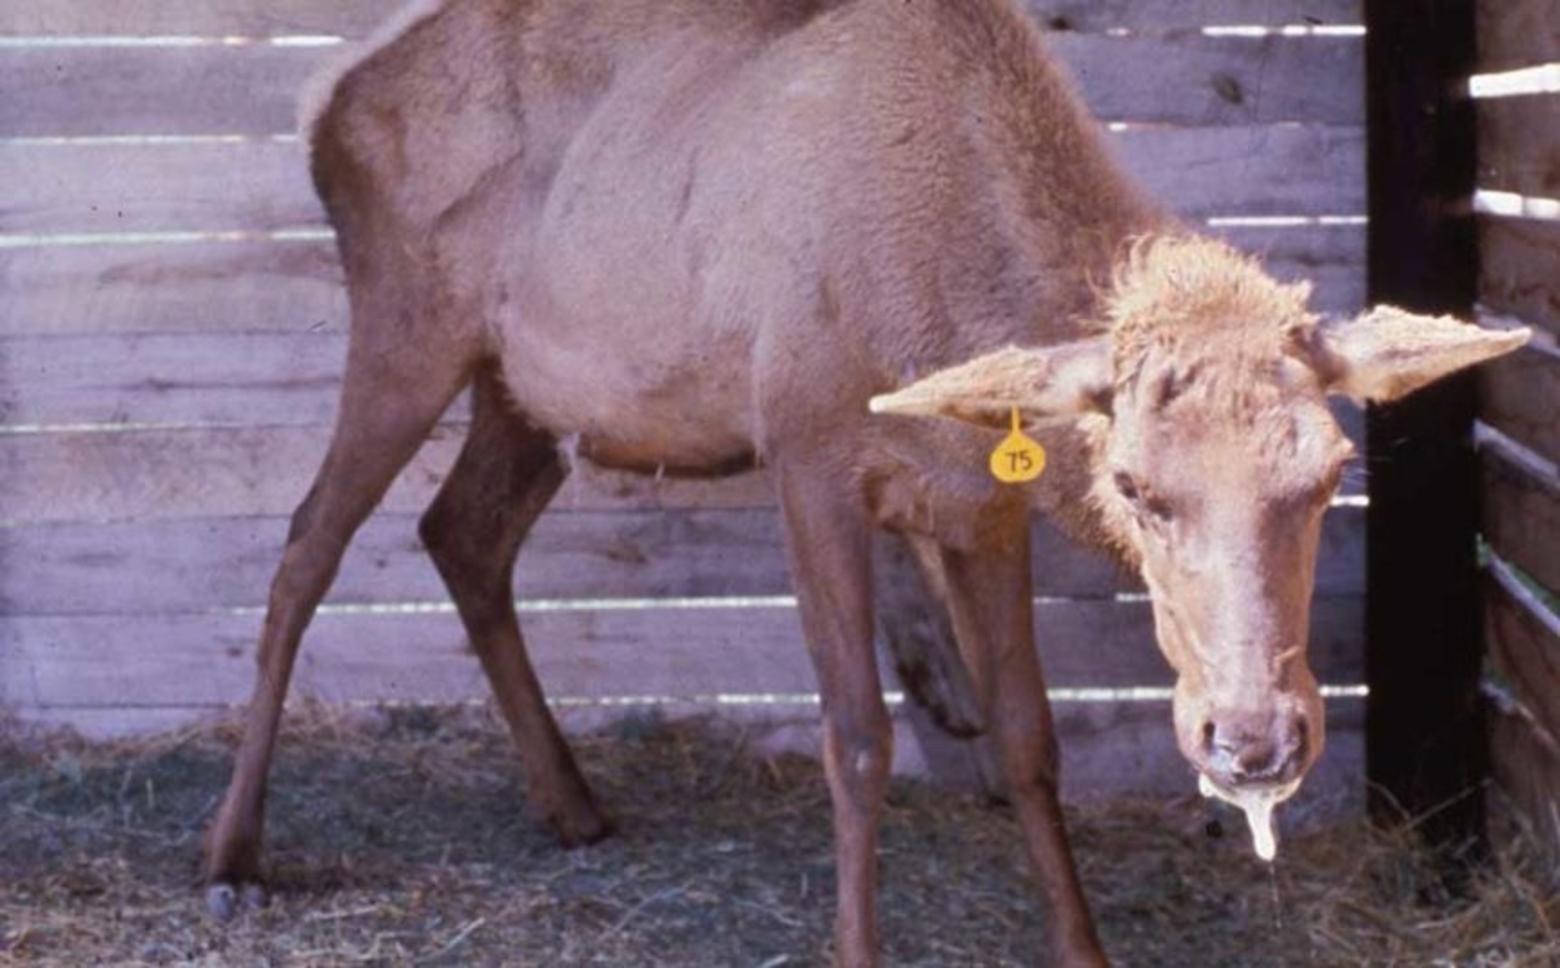 A research elk in Wyoming afflicted with CWD and showing overt symptoms of the disease in its final days of life. Photo courtesy Wyoming Fish and Game